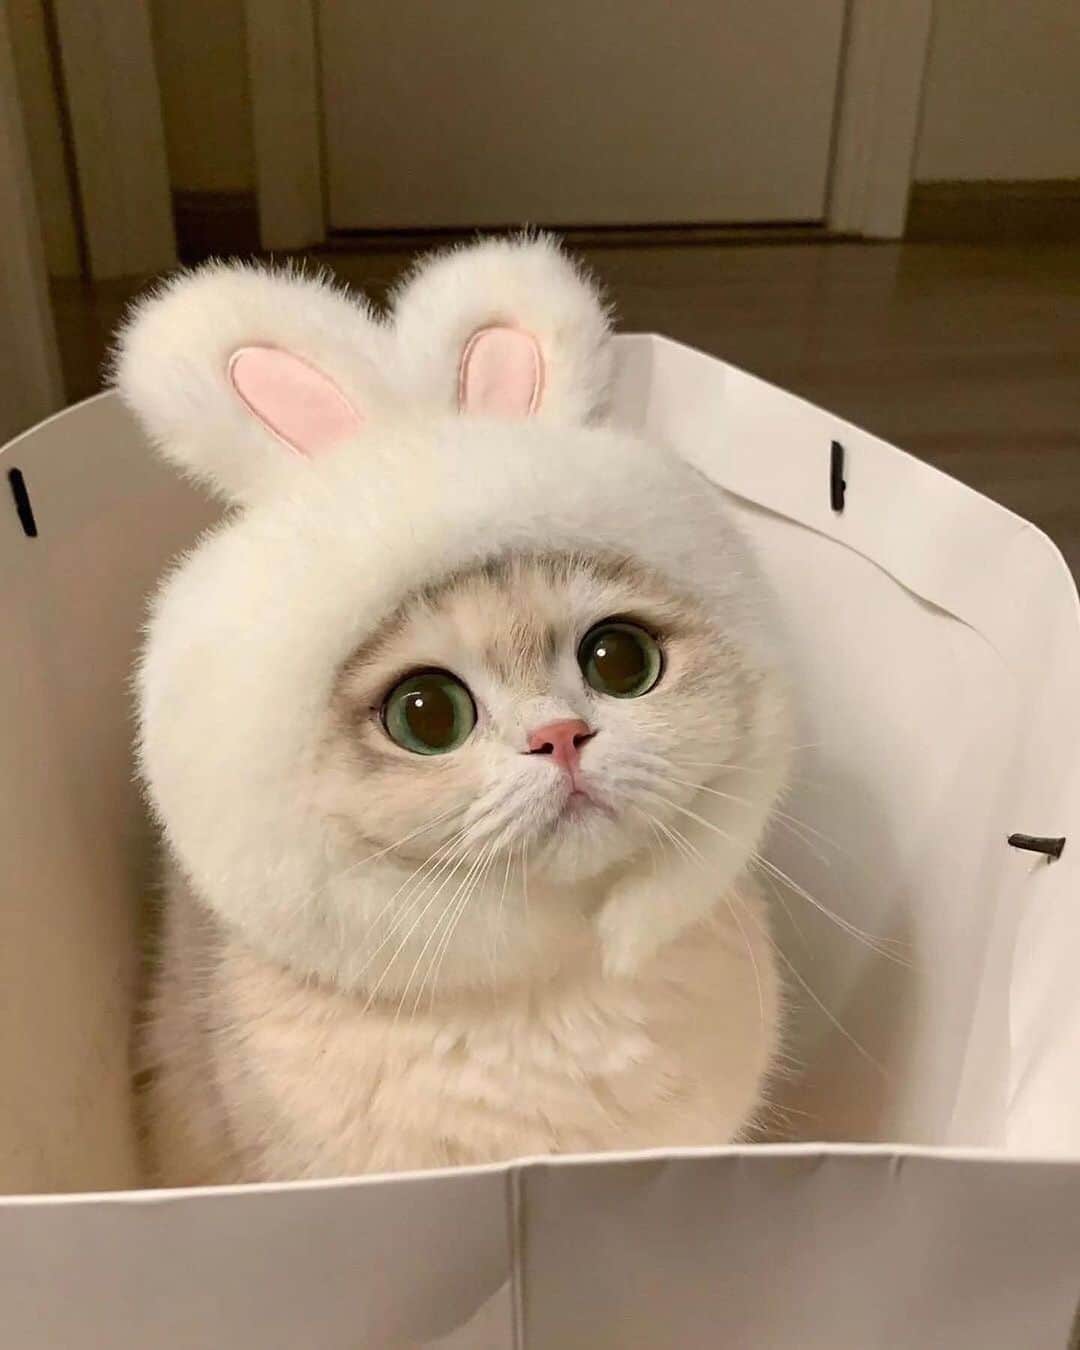 Cute Pets Dogs Catsさんのインスタグラム写真 - (Cute Pets Dogs CatsInstagram)「Bunny 😉  Credit: @薄荷猫猫甜不甜 - DY For all crediting issues and removals pls 𝐄𝐦𝐚𝐢𝐥 𝐮𝐬 ☺️  𝐍𝐨𝐭𝐞: we don’t own this video/pics, all rights go to their respective owners. If owner is not provided, tagged (meaning we couldn’t find who is the owner), 𝐩𝐥𝐬 𝐄𝐦𝐚𝐢𝐥 𝐮𝐬 with 𝐬𝐮𝐛𝐣𝐞𝐜𝐭 “𝐂𝐫𝐞𝐝𝐢𝐭 𝐈𝐬𝐬𝐮𝐞𝐬” and 𝐨𝐰𝐧𝐞𝐫 𝐰𝐢𝐥𝐥 𝐛𝐞 𝐭𝐚𝐠𝐠𝐞𝐝 𝐬𝐡𝐨𝐫𝐭𝐥𝐲 𝐚𝐟𝐭𝐞𝐫.  We have been building this community for over 6 years, but 𝐞𝐯𝐞𝐫𝐲 𝐫𝐞𝐩𝐨𝐫𝐭 𝐜𝐨𝐮𝐥𝐝 𝐠𝐞𝐭 𝐨𝐮𝐫 𝐩𝐚𝐠𝐞 𝐝𝐞𝐥𝐞𝐭𝐞𝐝, pls email us first. **」10月25日 6時56分 - dailycatclub